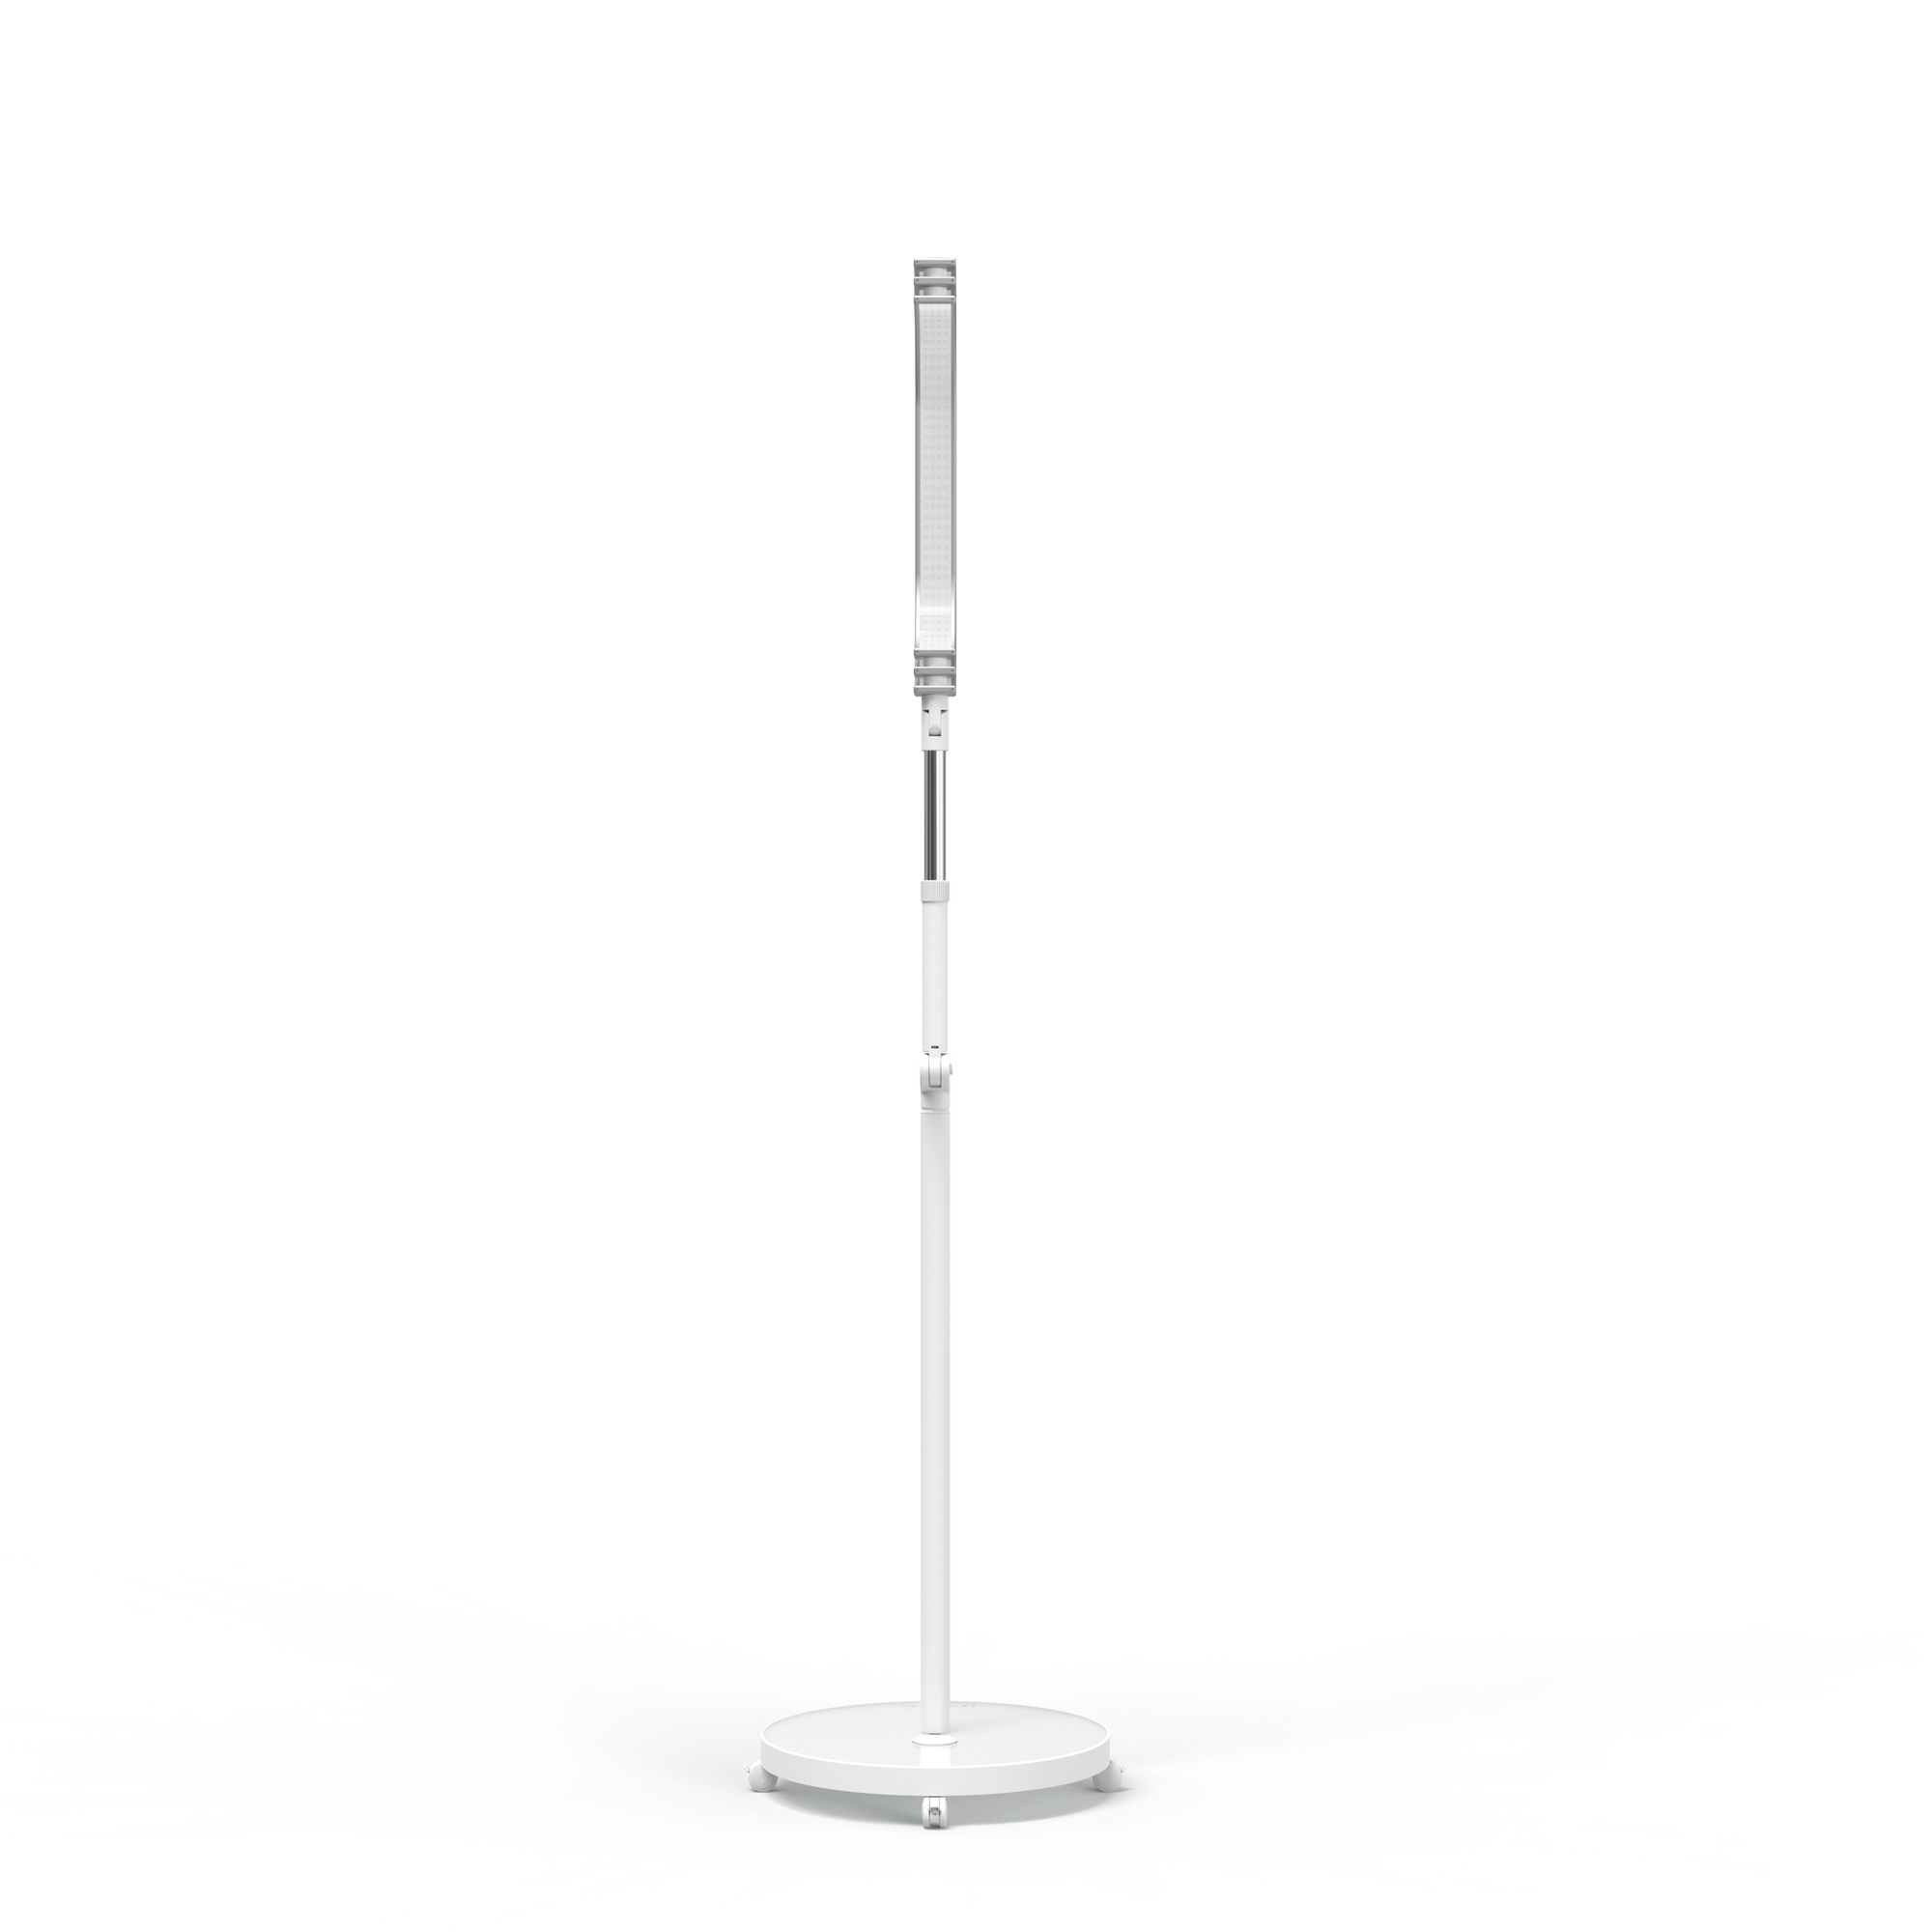 Optimize Your Treatments with Glamcor Horizon Eclipse Stand: Mobility Meets LED Therapy Perfection!